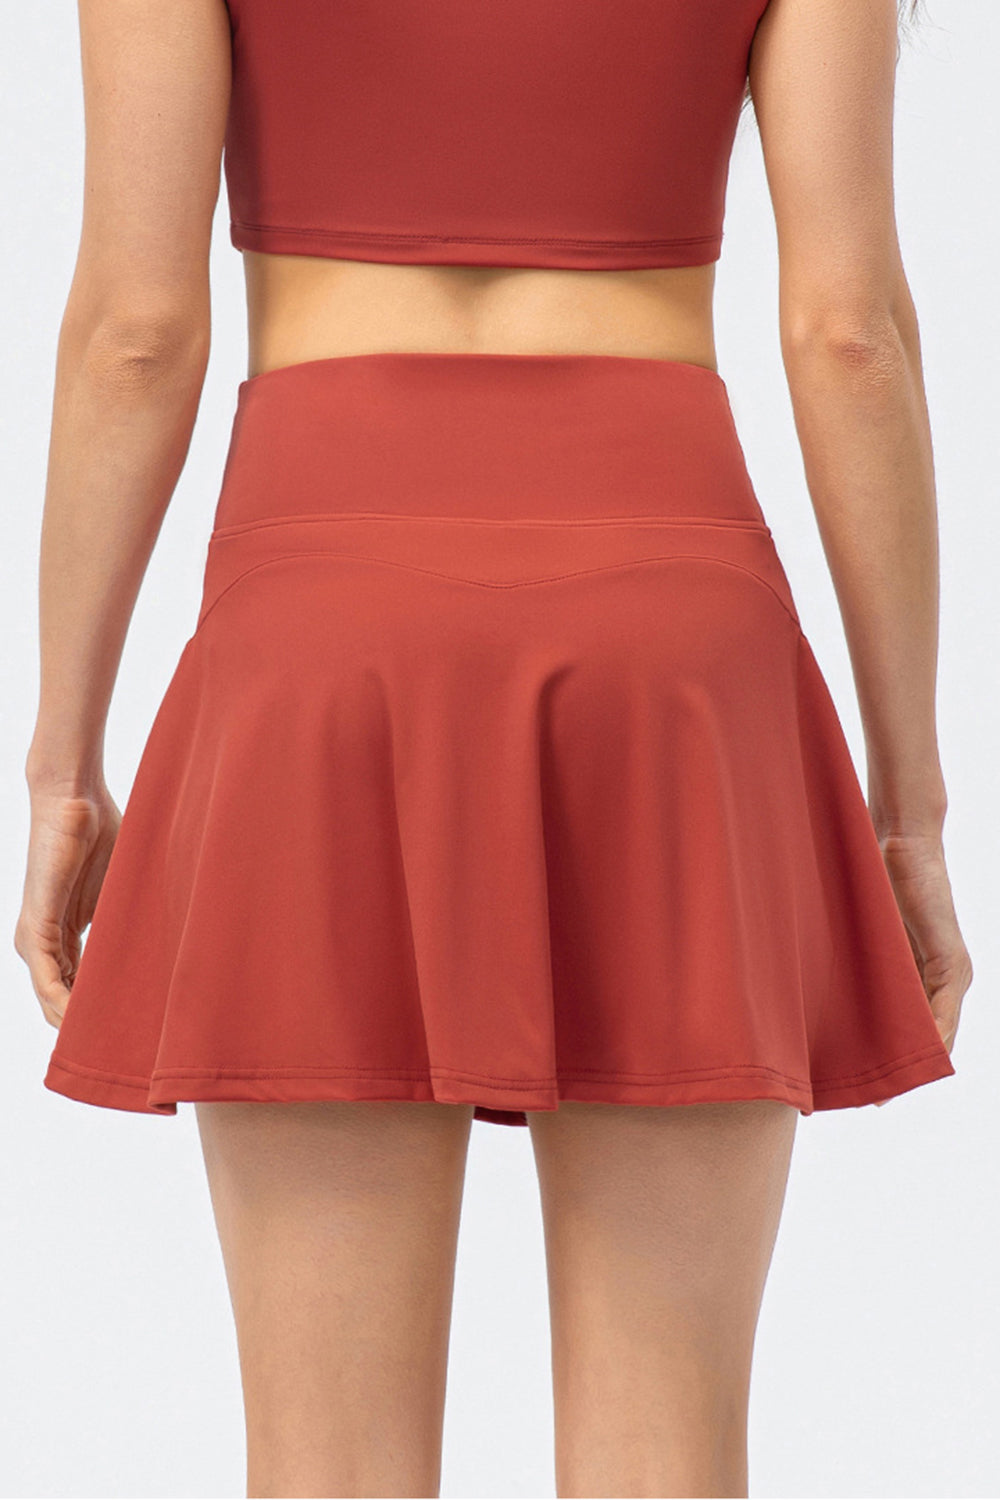 Shop the stylish High Waist Active Skirt with built-in shorts for comfort & elegance during your workouts or casual wear.